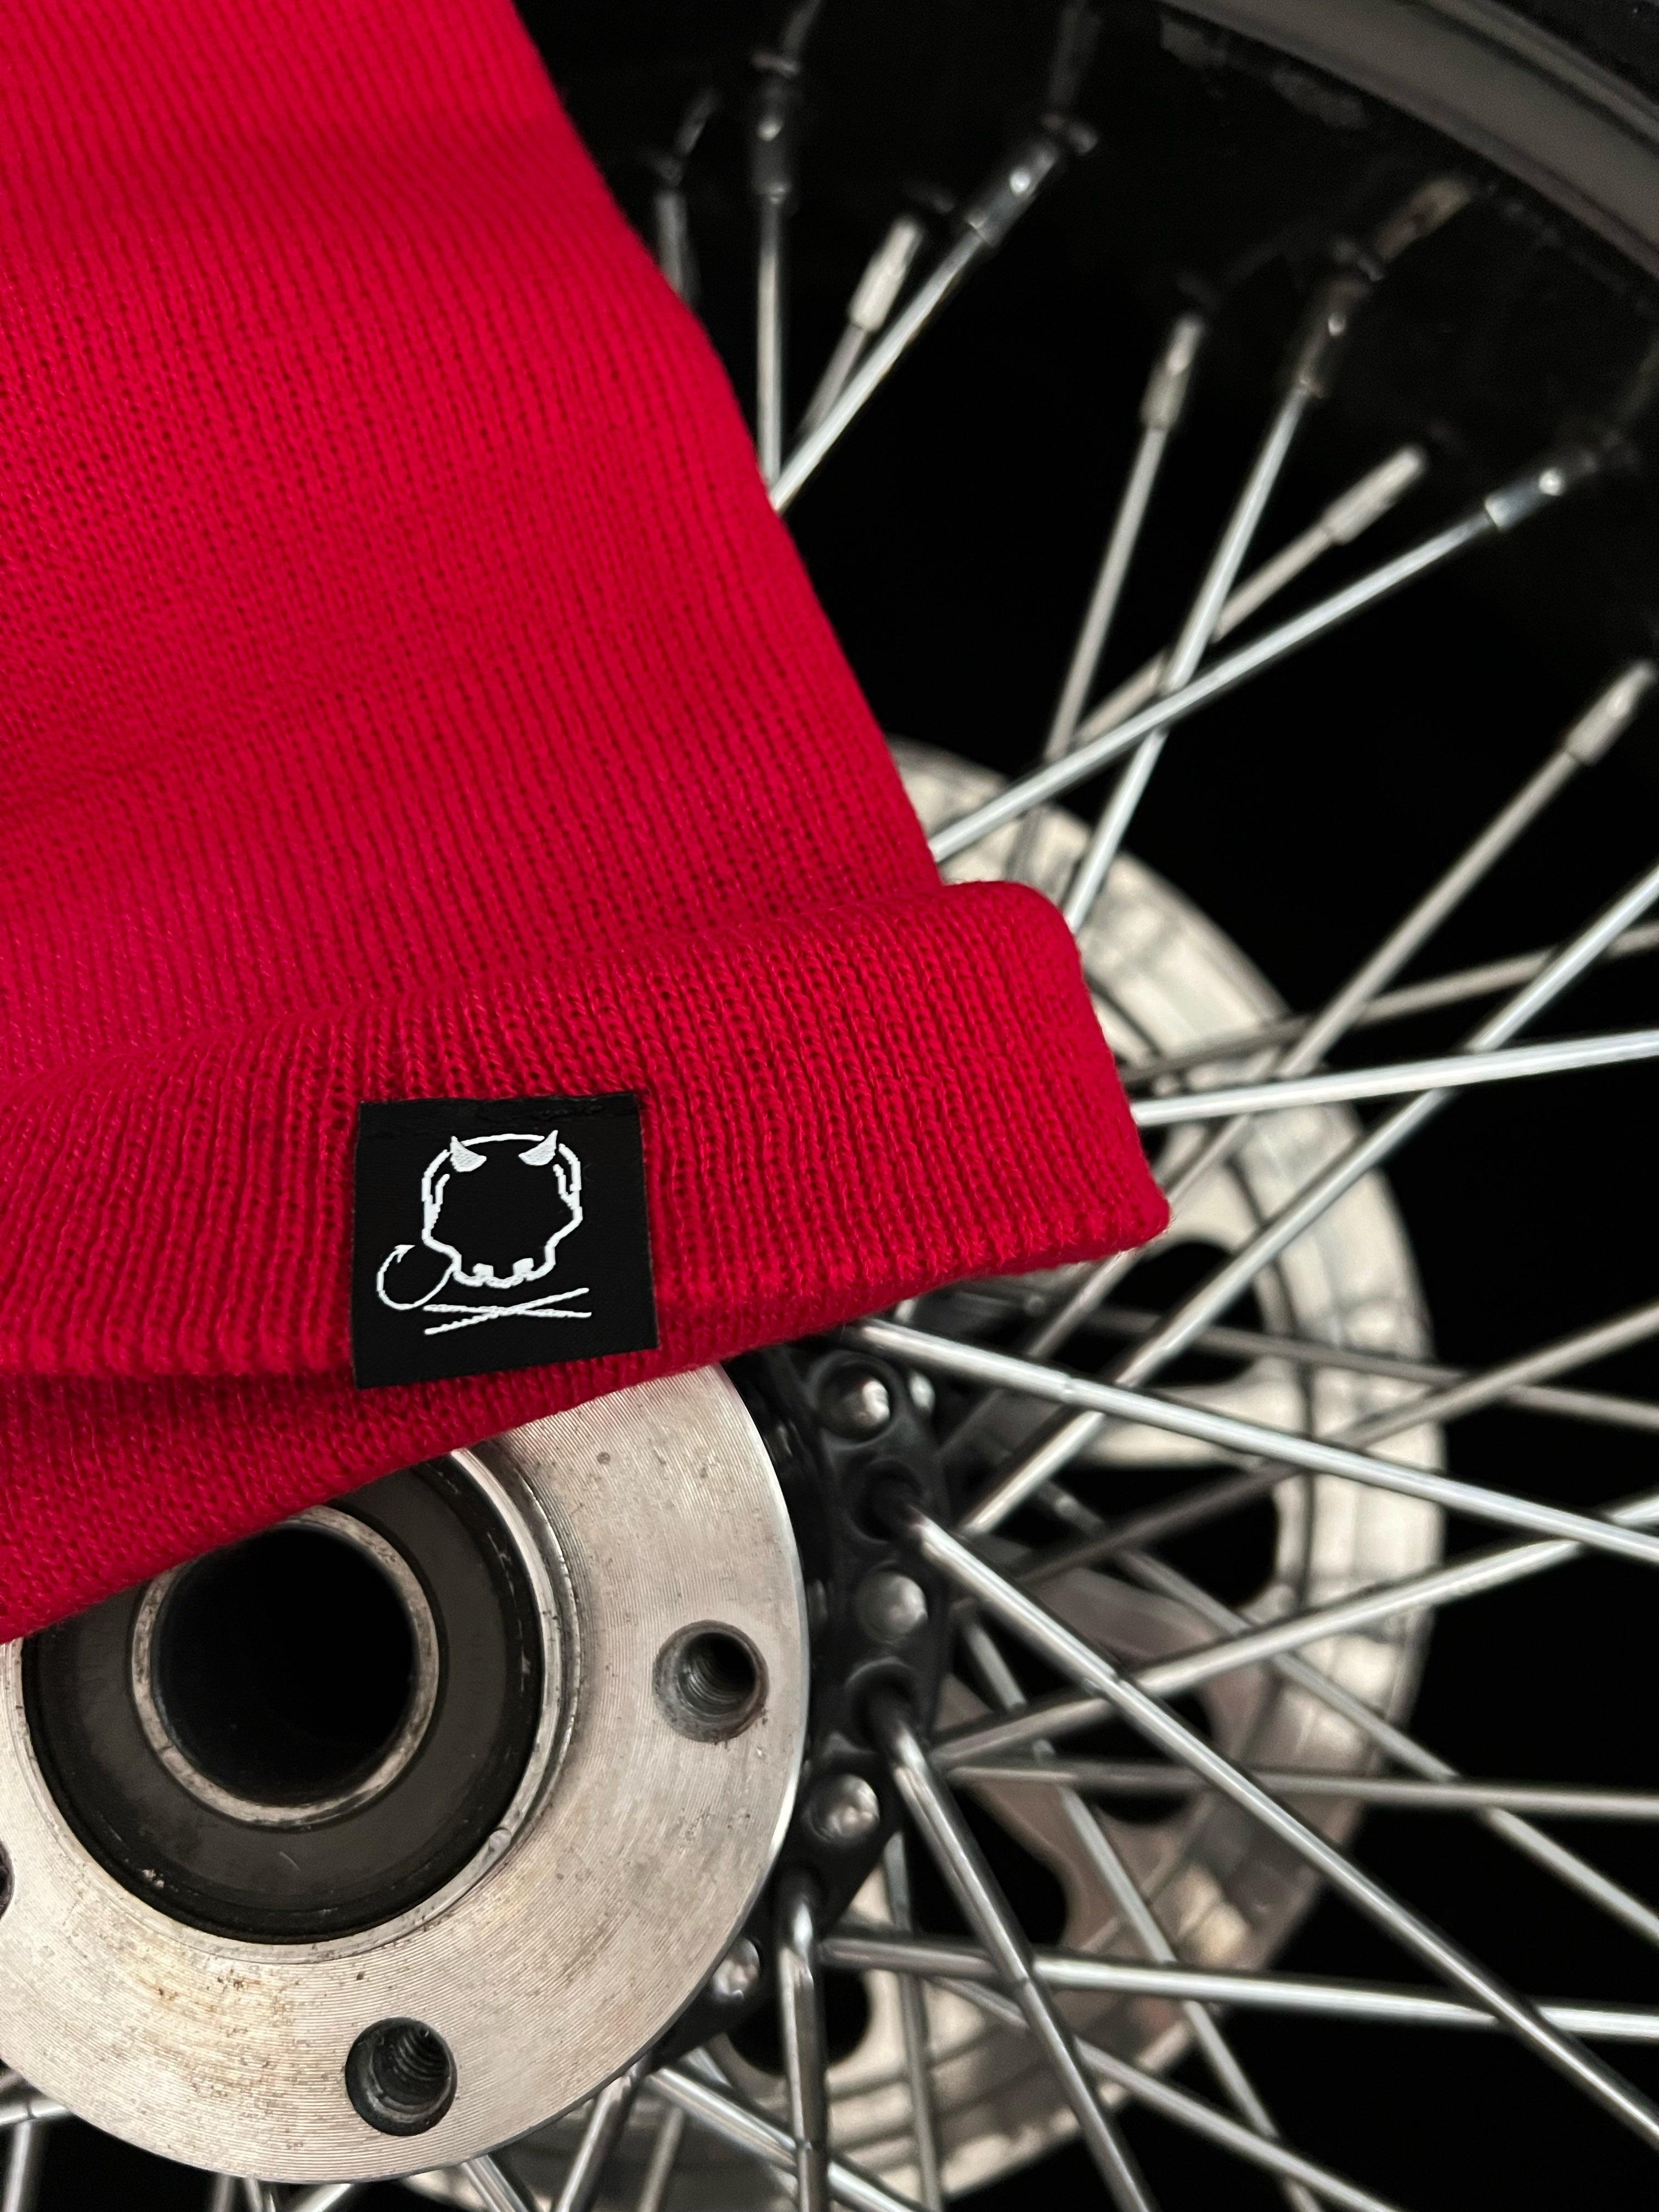 TROUBLE MAKER RED BEANIE – The Drive Clothing